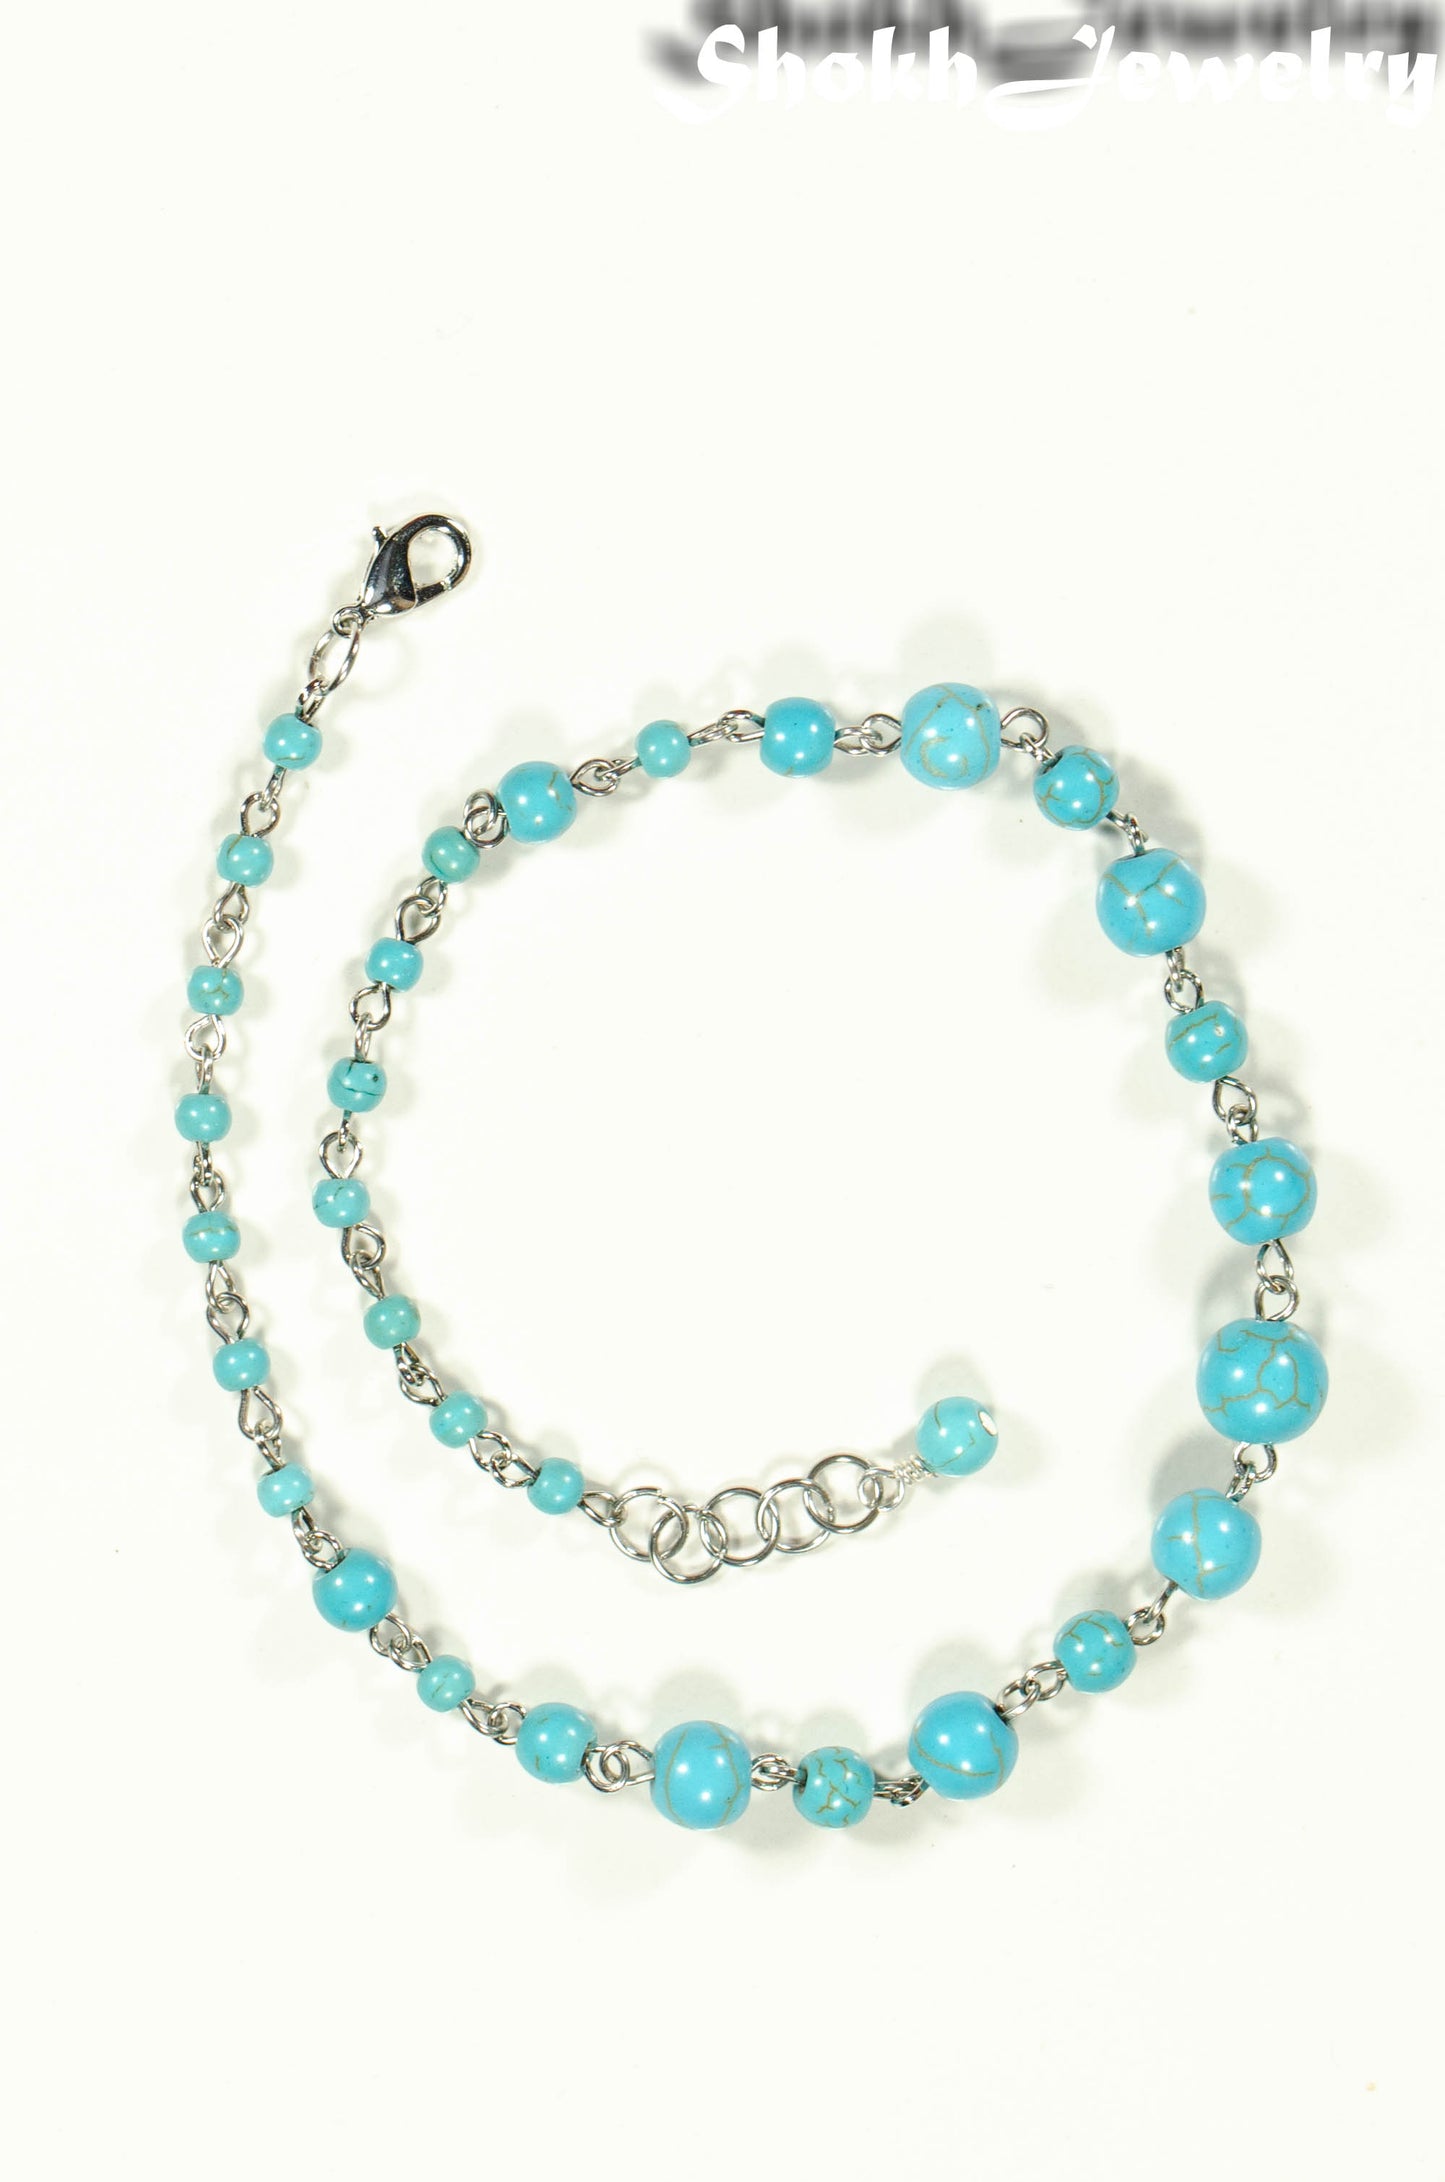 Top view of Handmade Turquoise Howlite Link Choker Necklace.